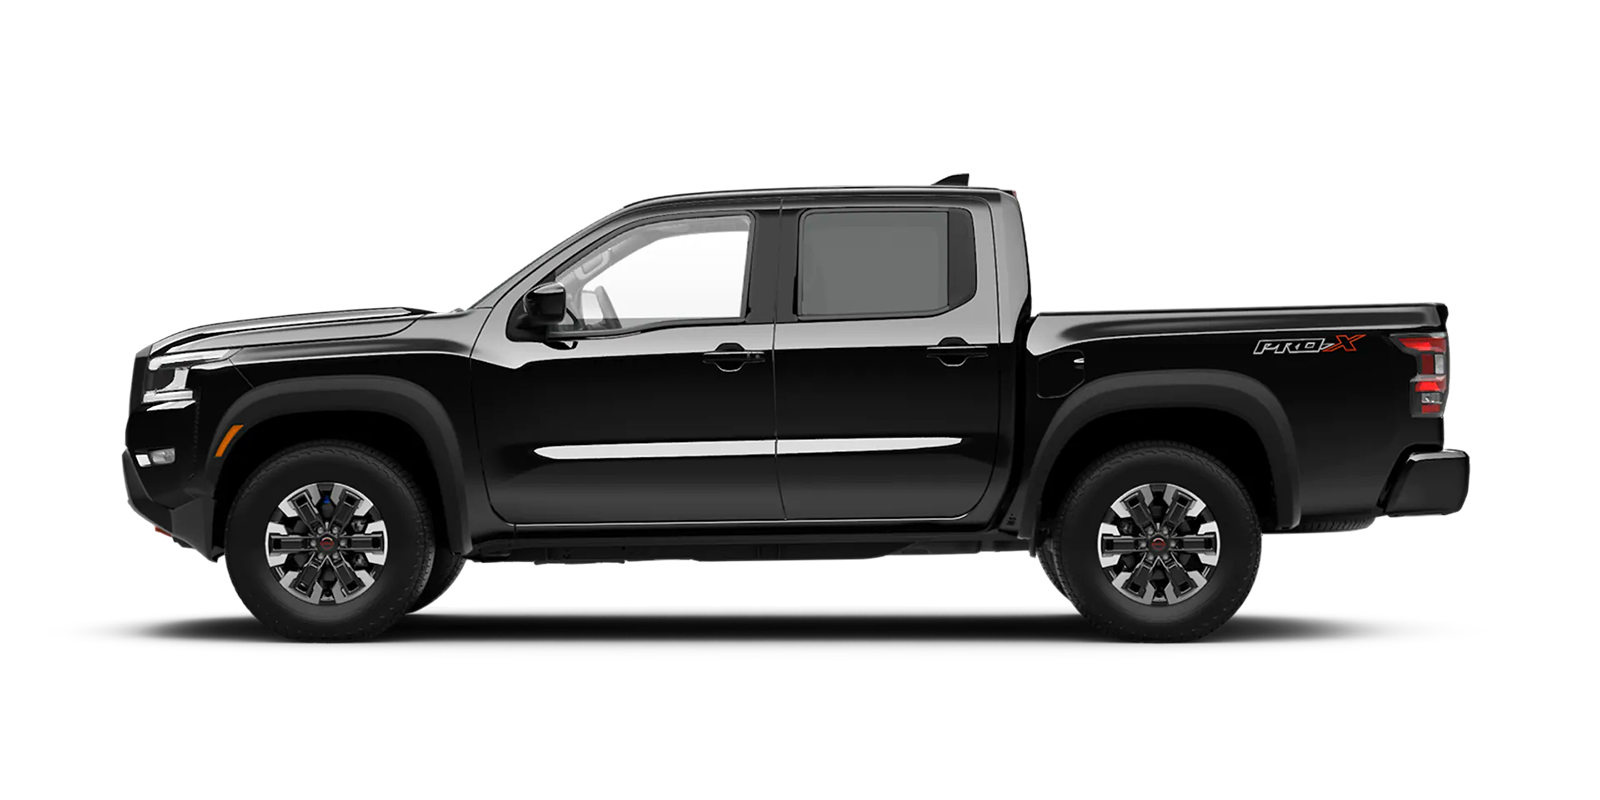 2022 Frontier Crew Cab Pro-X 4x2 in Super Black | Greenway Nissan of Florence in Florence AL